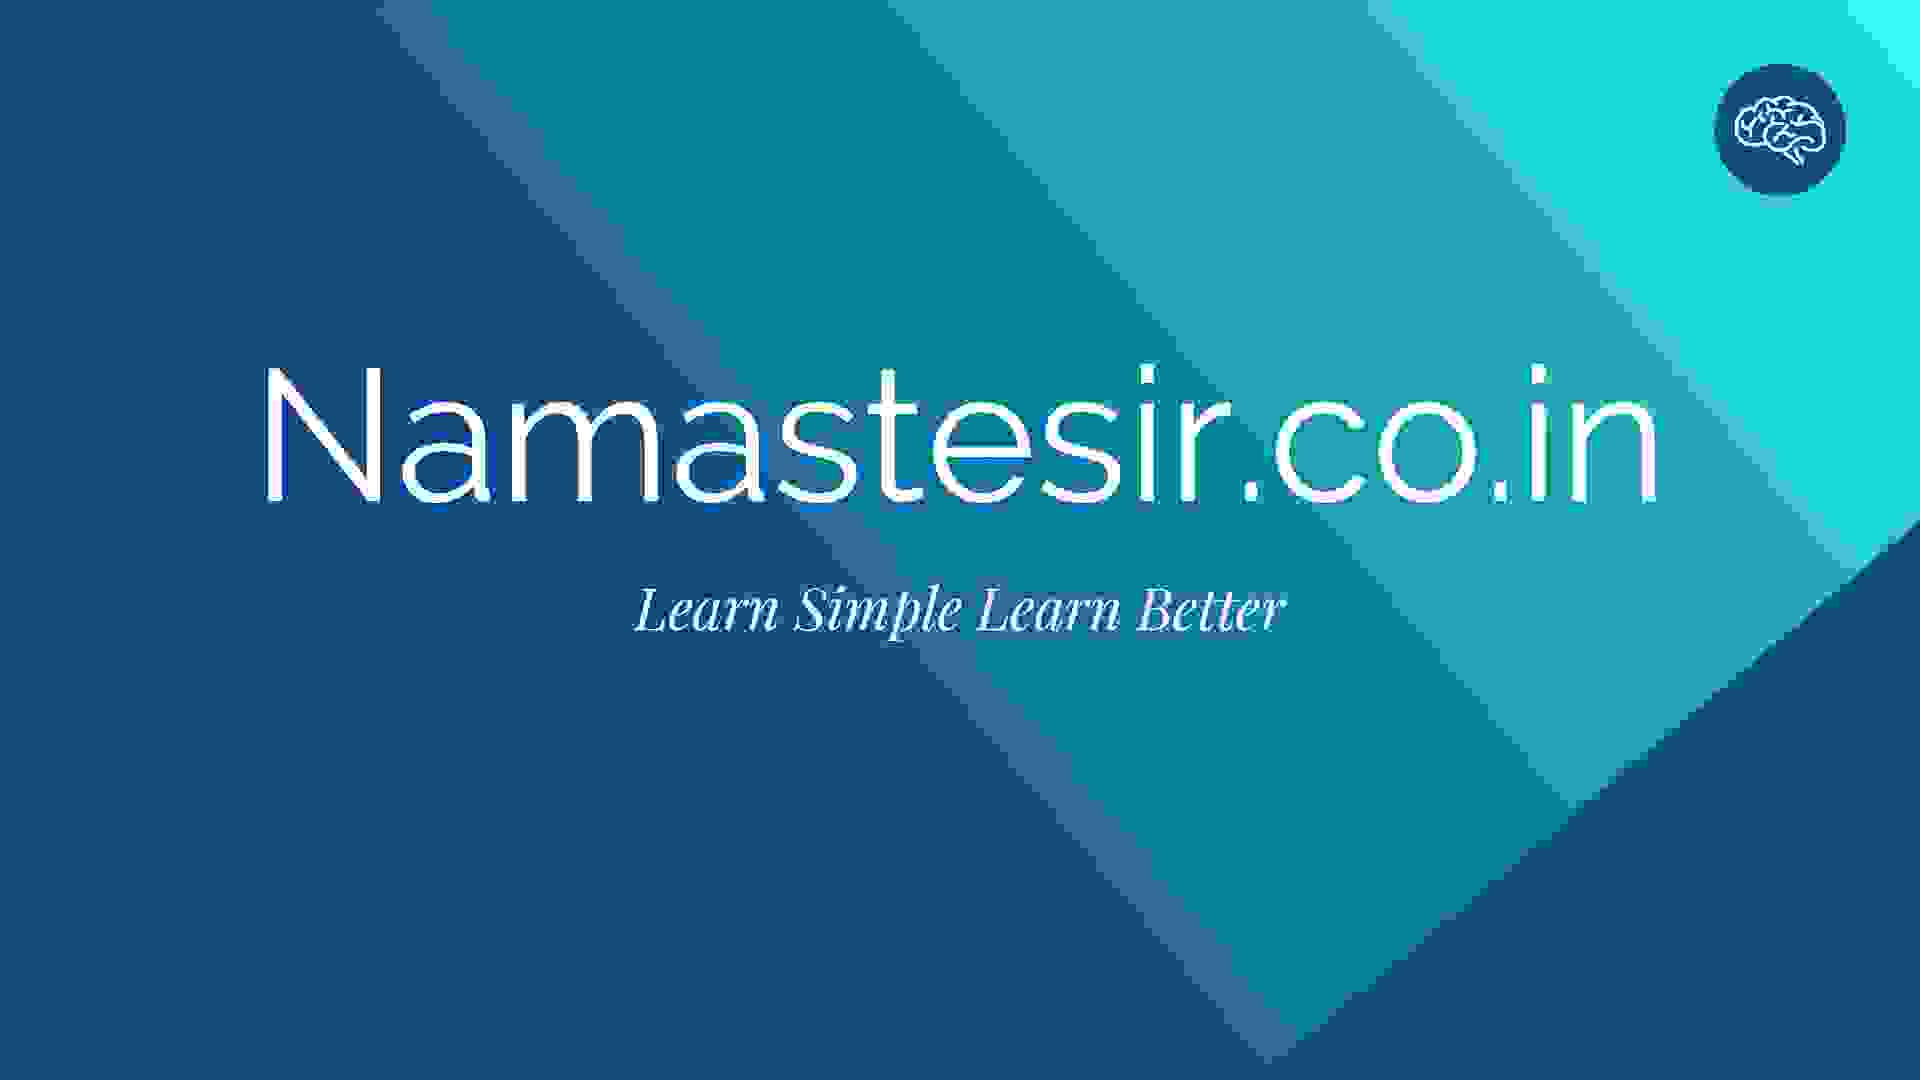 Namastesir.co.in about Us Page